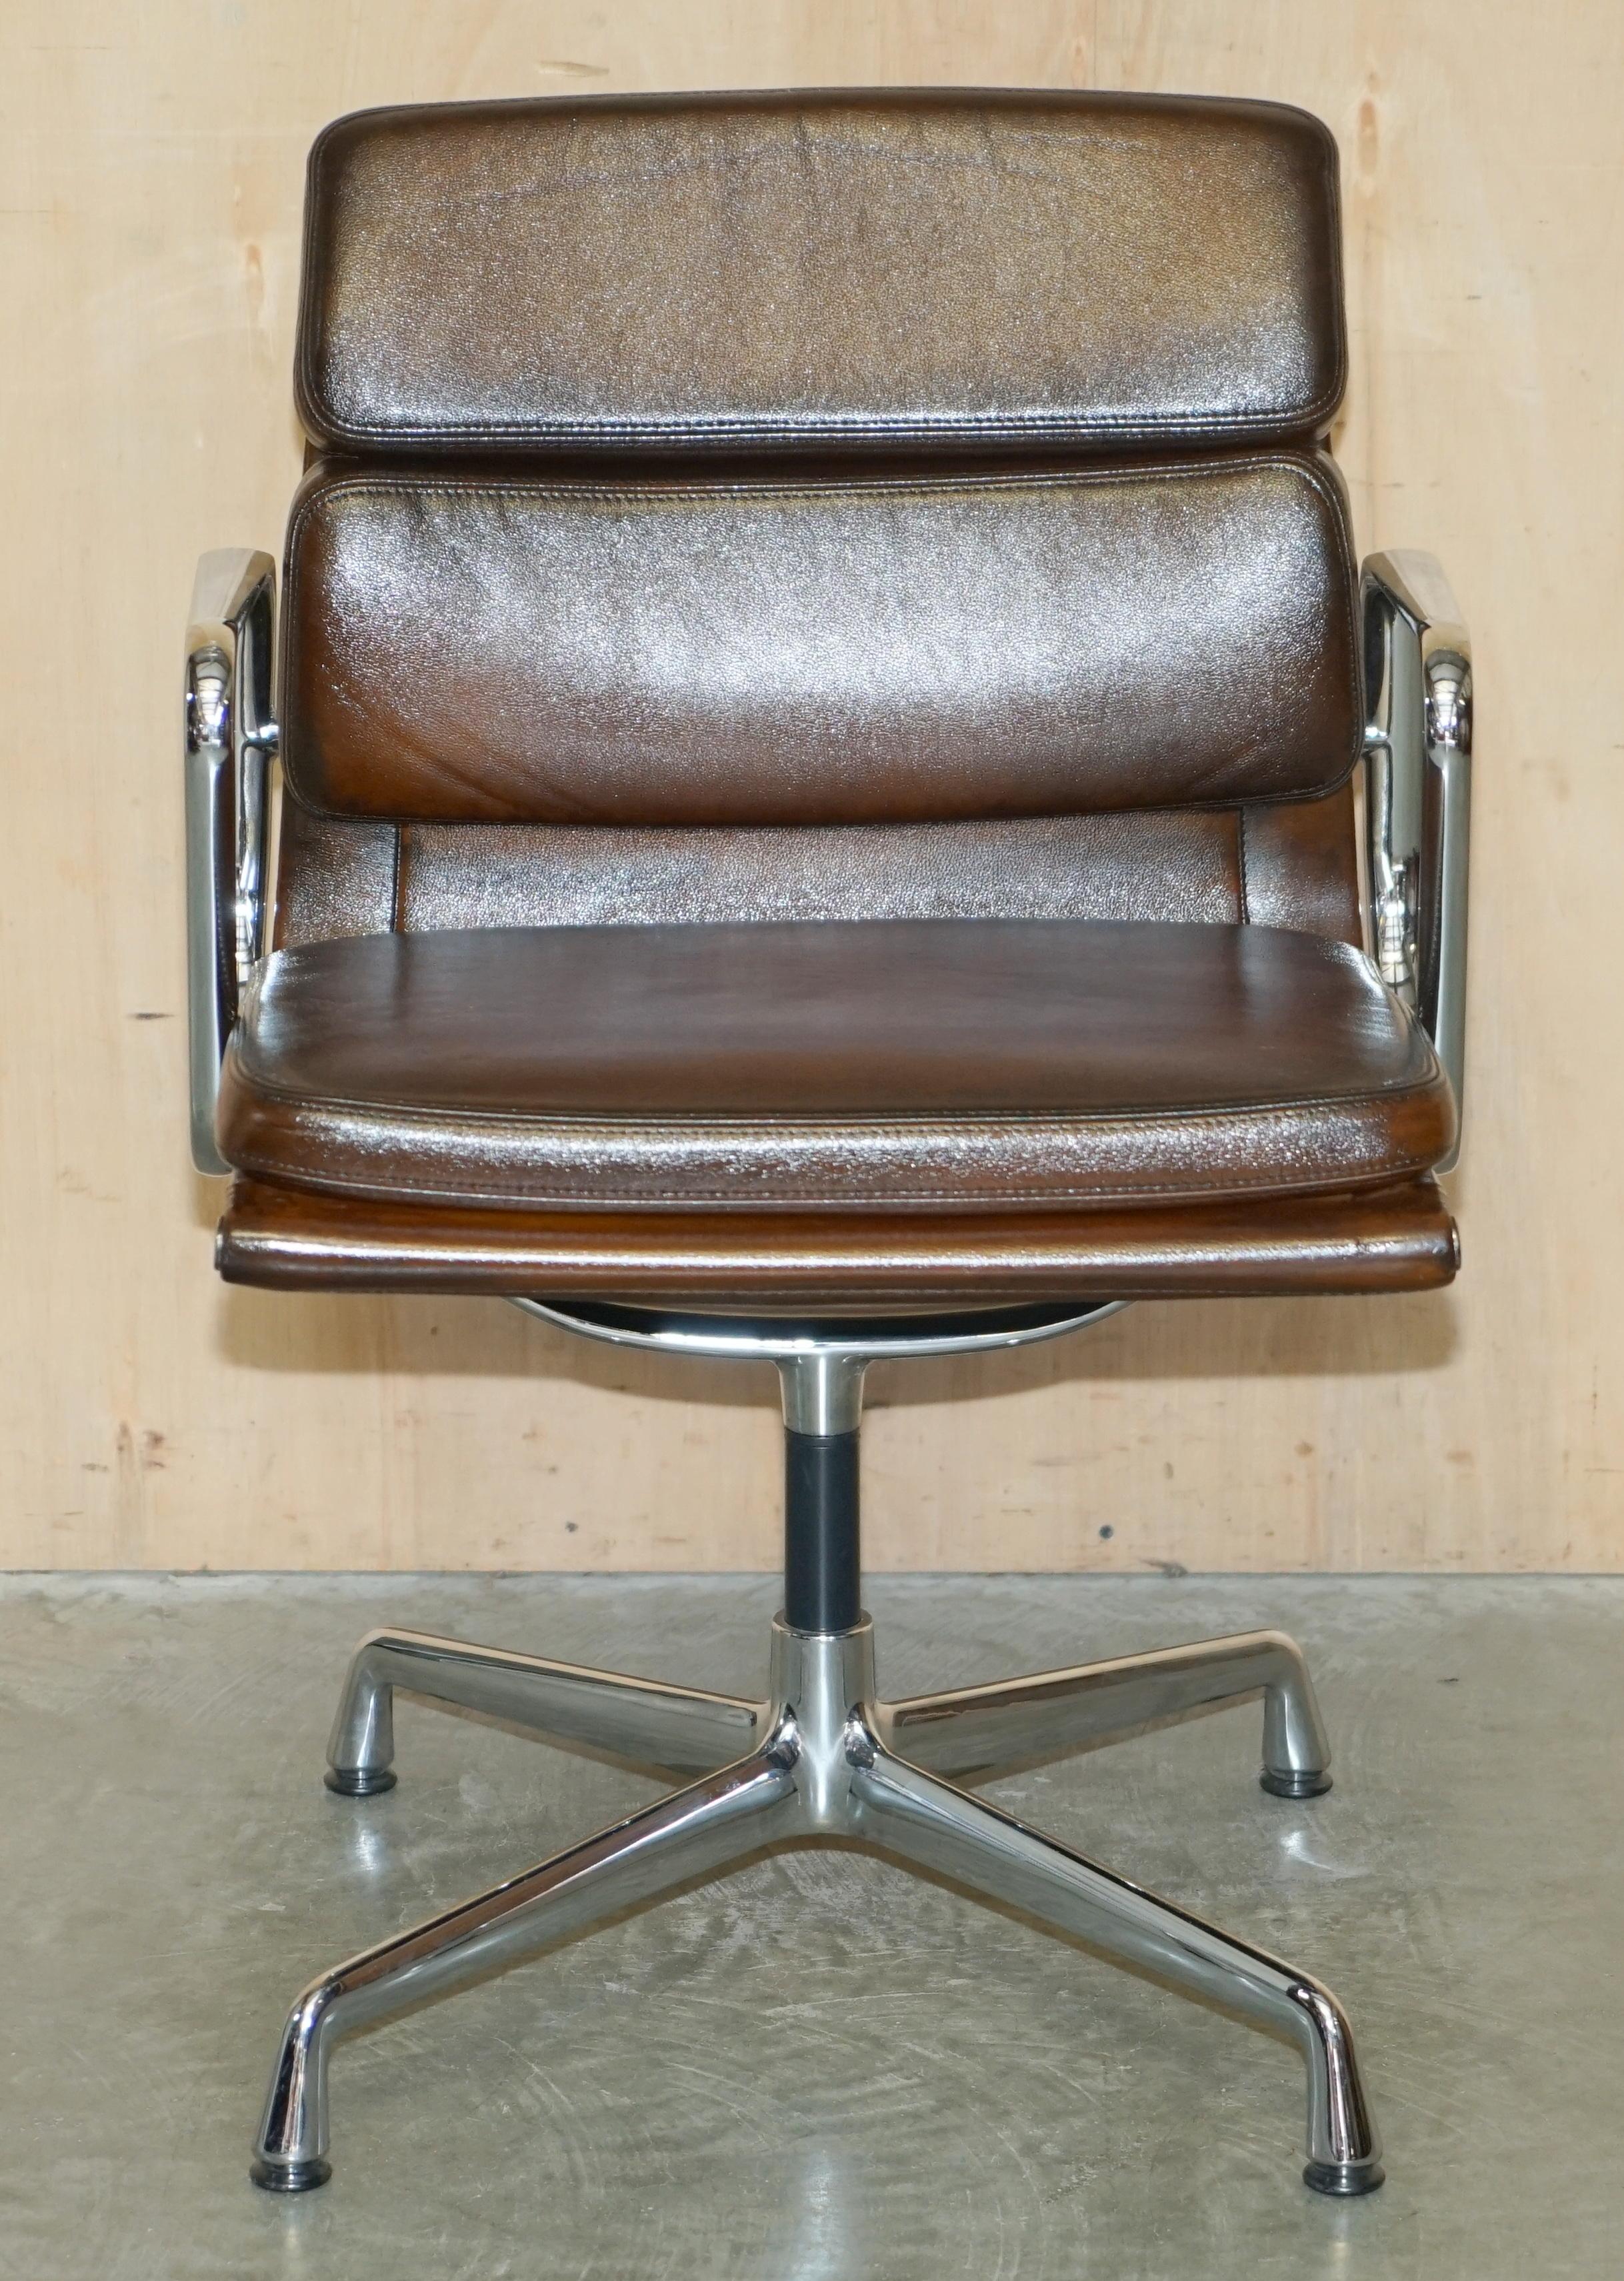 Royal House Antiques

Royal House Antiques is delighted to offer for sale this one of a kind, hand dyed, Vitra Eames EA 208 soft pad swivel office chair in Cigar brown leather RRP £3,337

Please note the delivery fee listed is just a guide, it